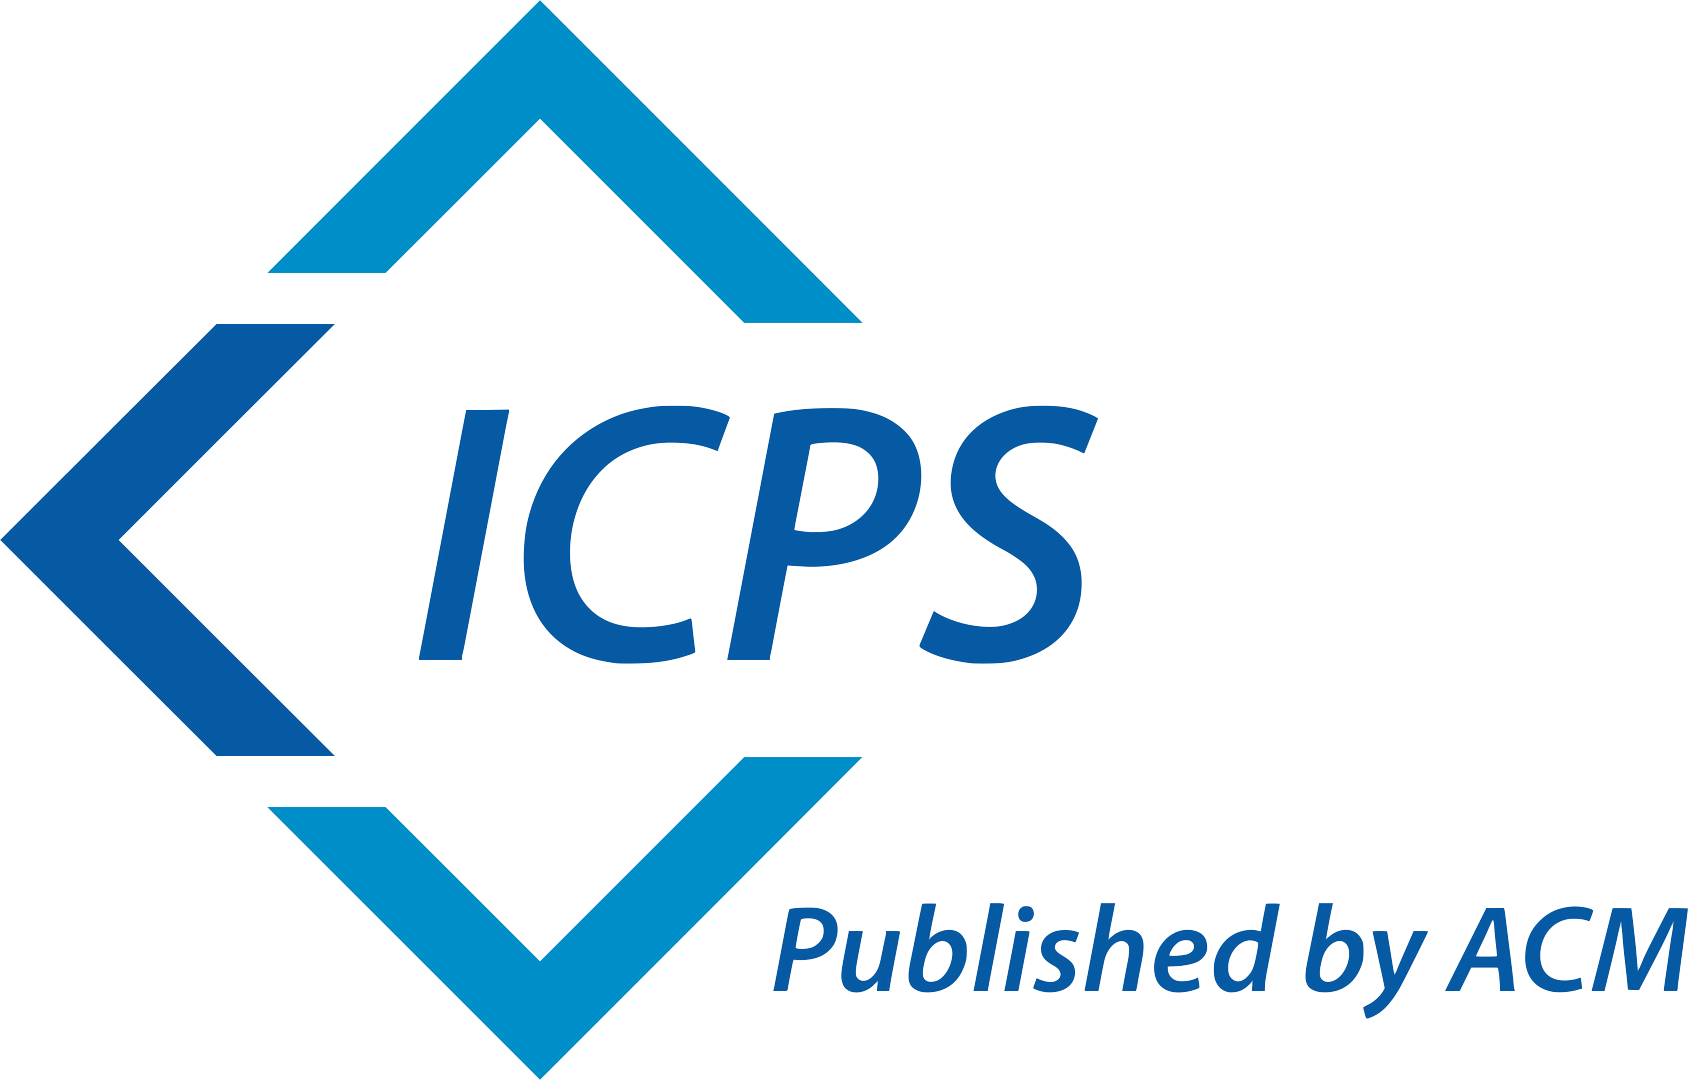 ICPS Published by ACM